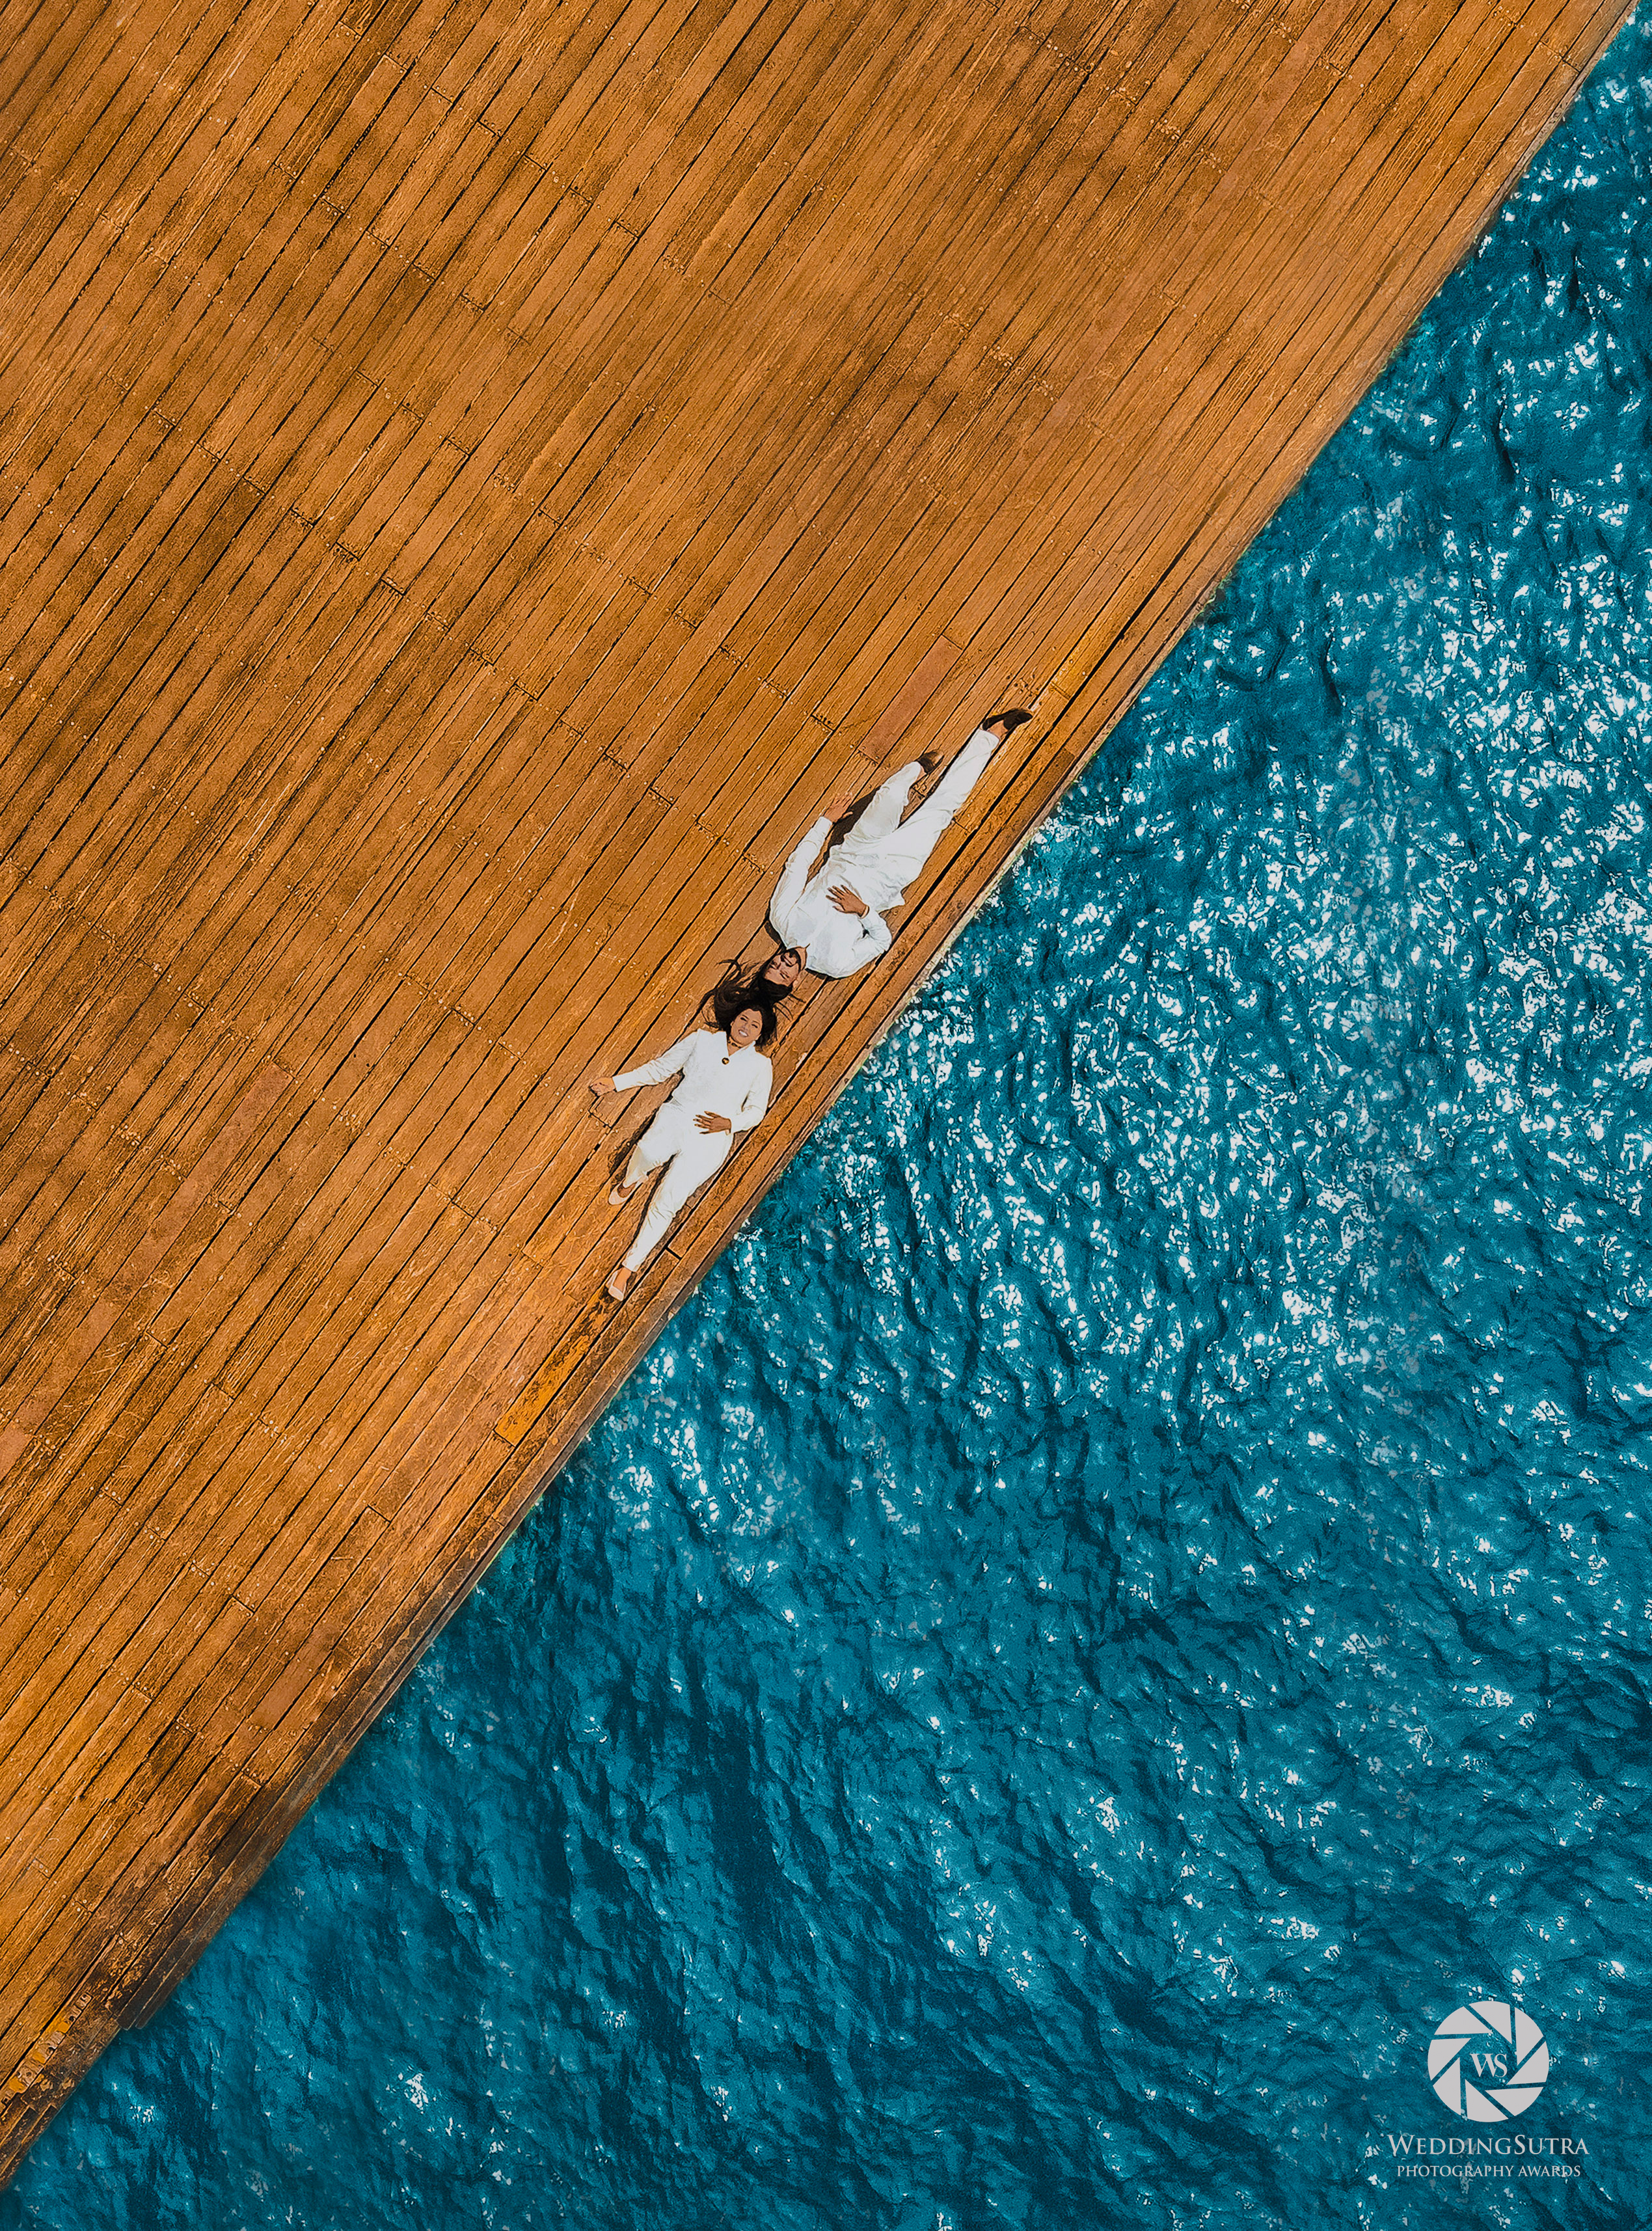 Photography Awards 2021 -- Aerial